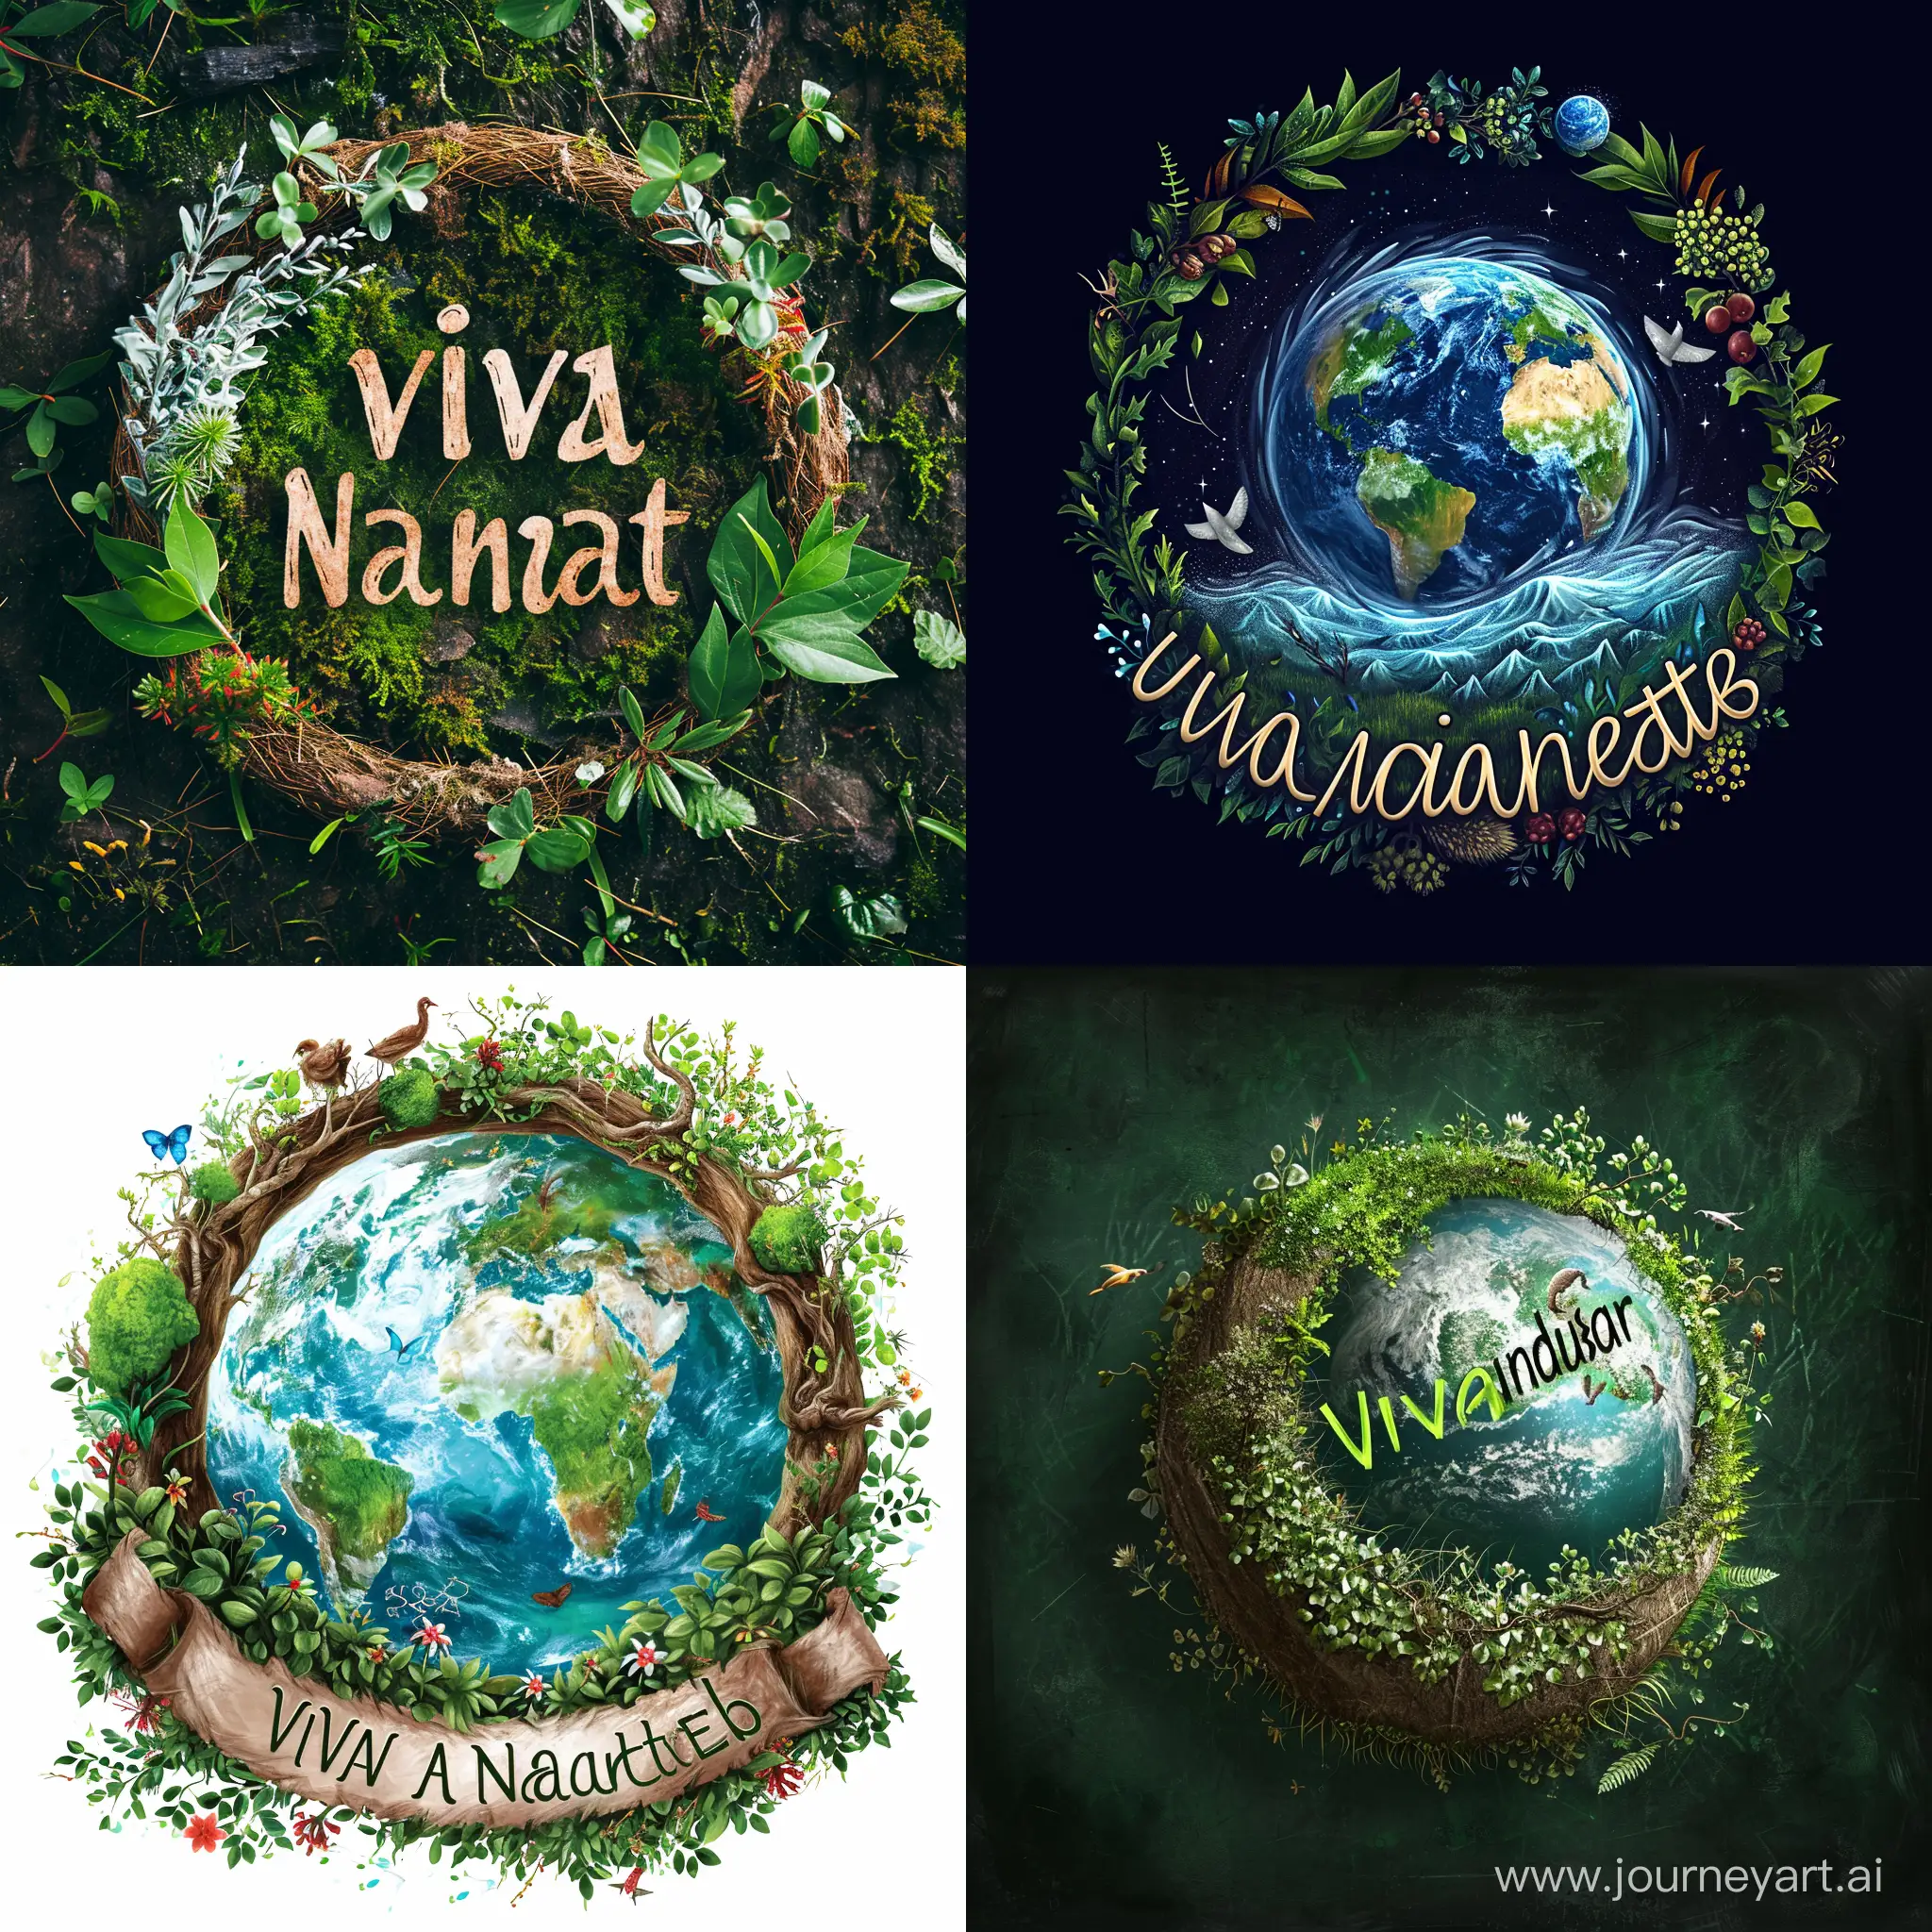 Make me a YouTube channel profile pic channel is called viva nature use NO TEXT use earth nature 